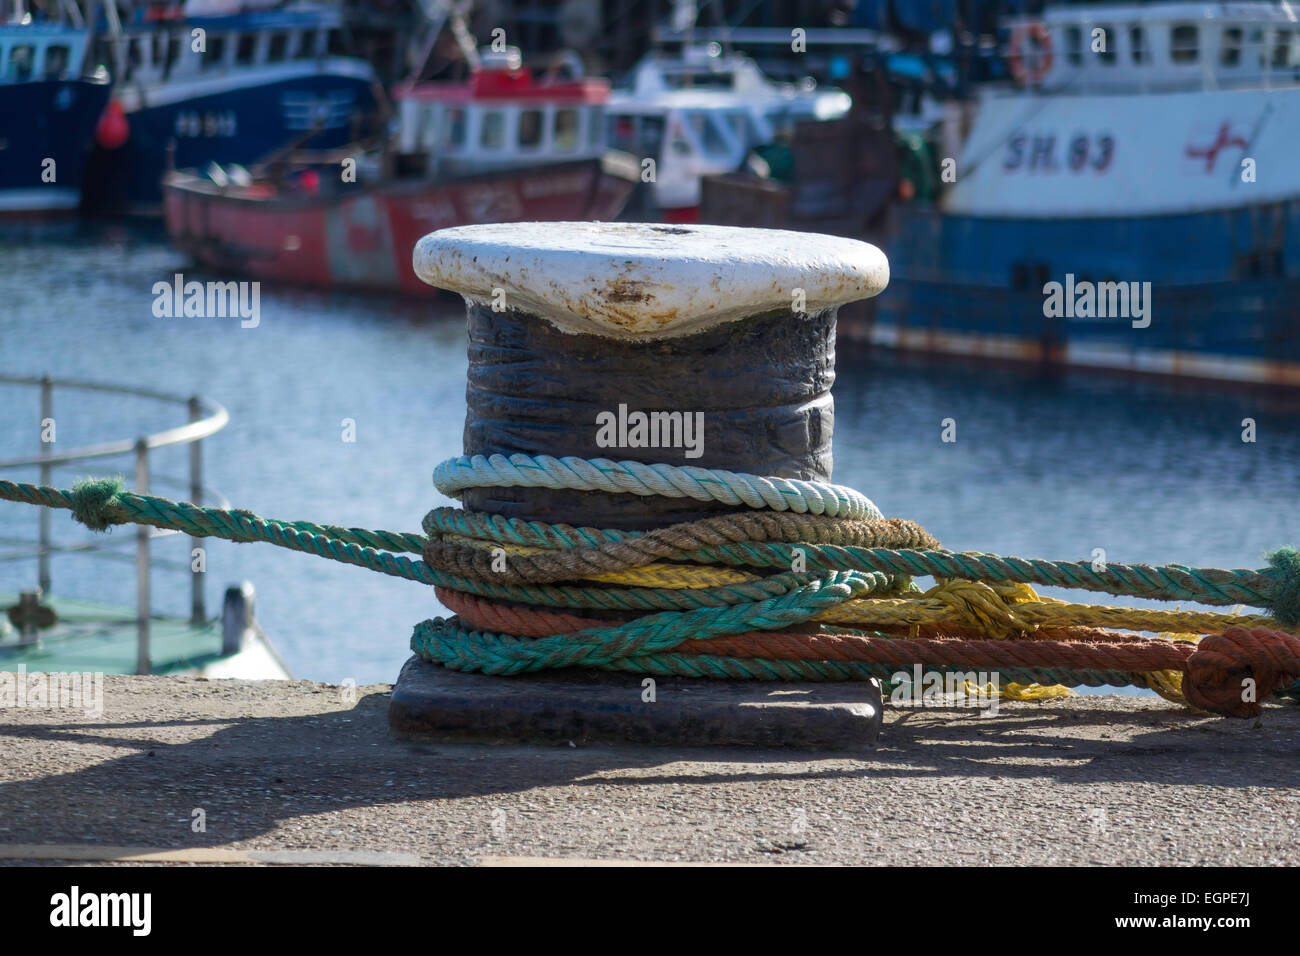 A typical dockside mooring bollard on North Wharf with fishing boat mooring ropes. Stock Photo